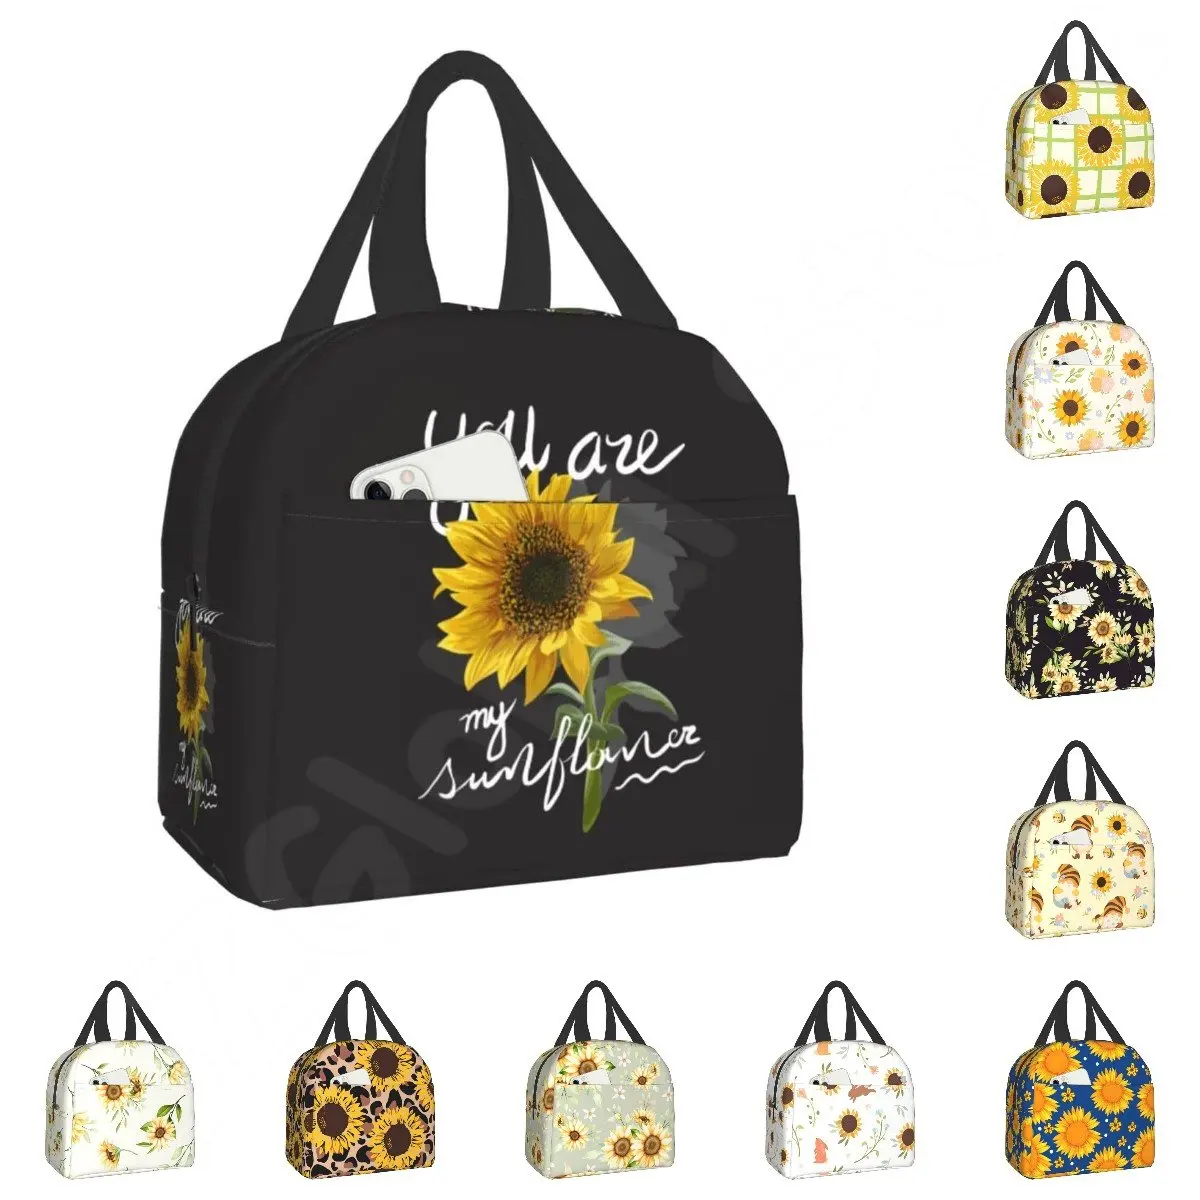 

Sunflower Lunch Bag You Are My Sunshine Insulated Lunch Box Cooler Thermal Waterproof Reusable Tote Bag for Women Work Picnic